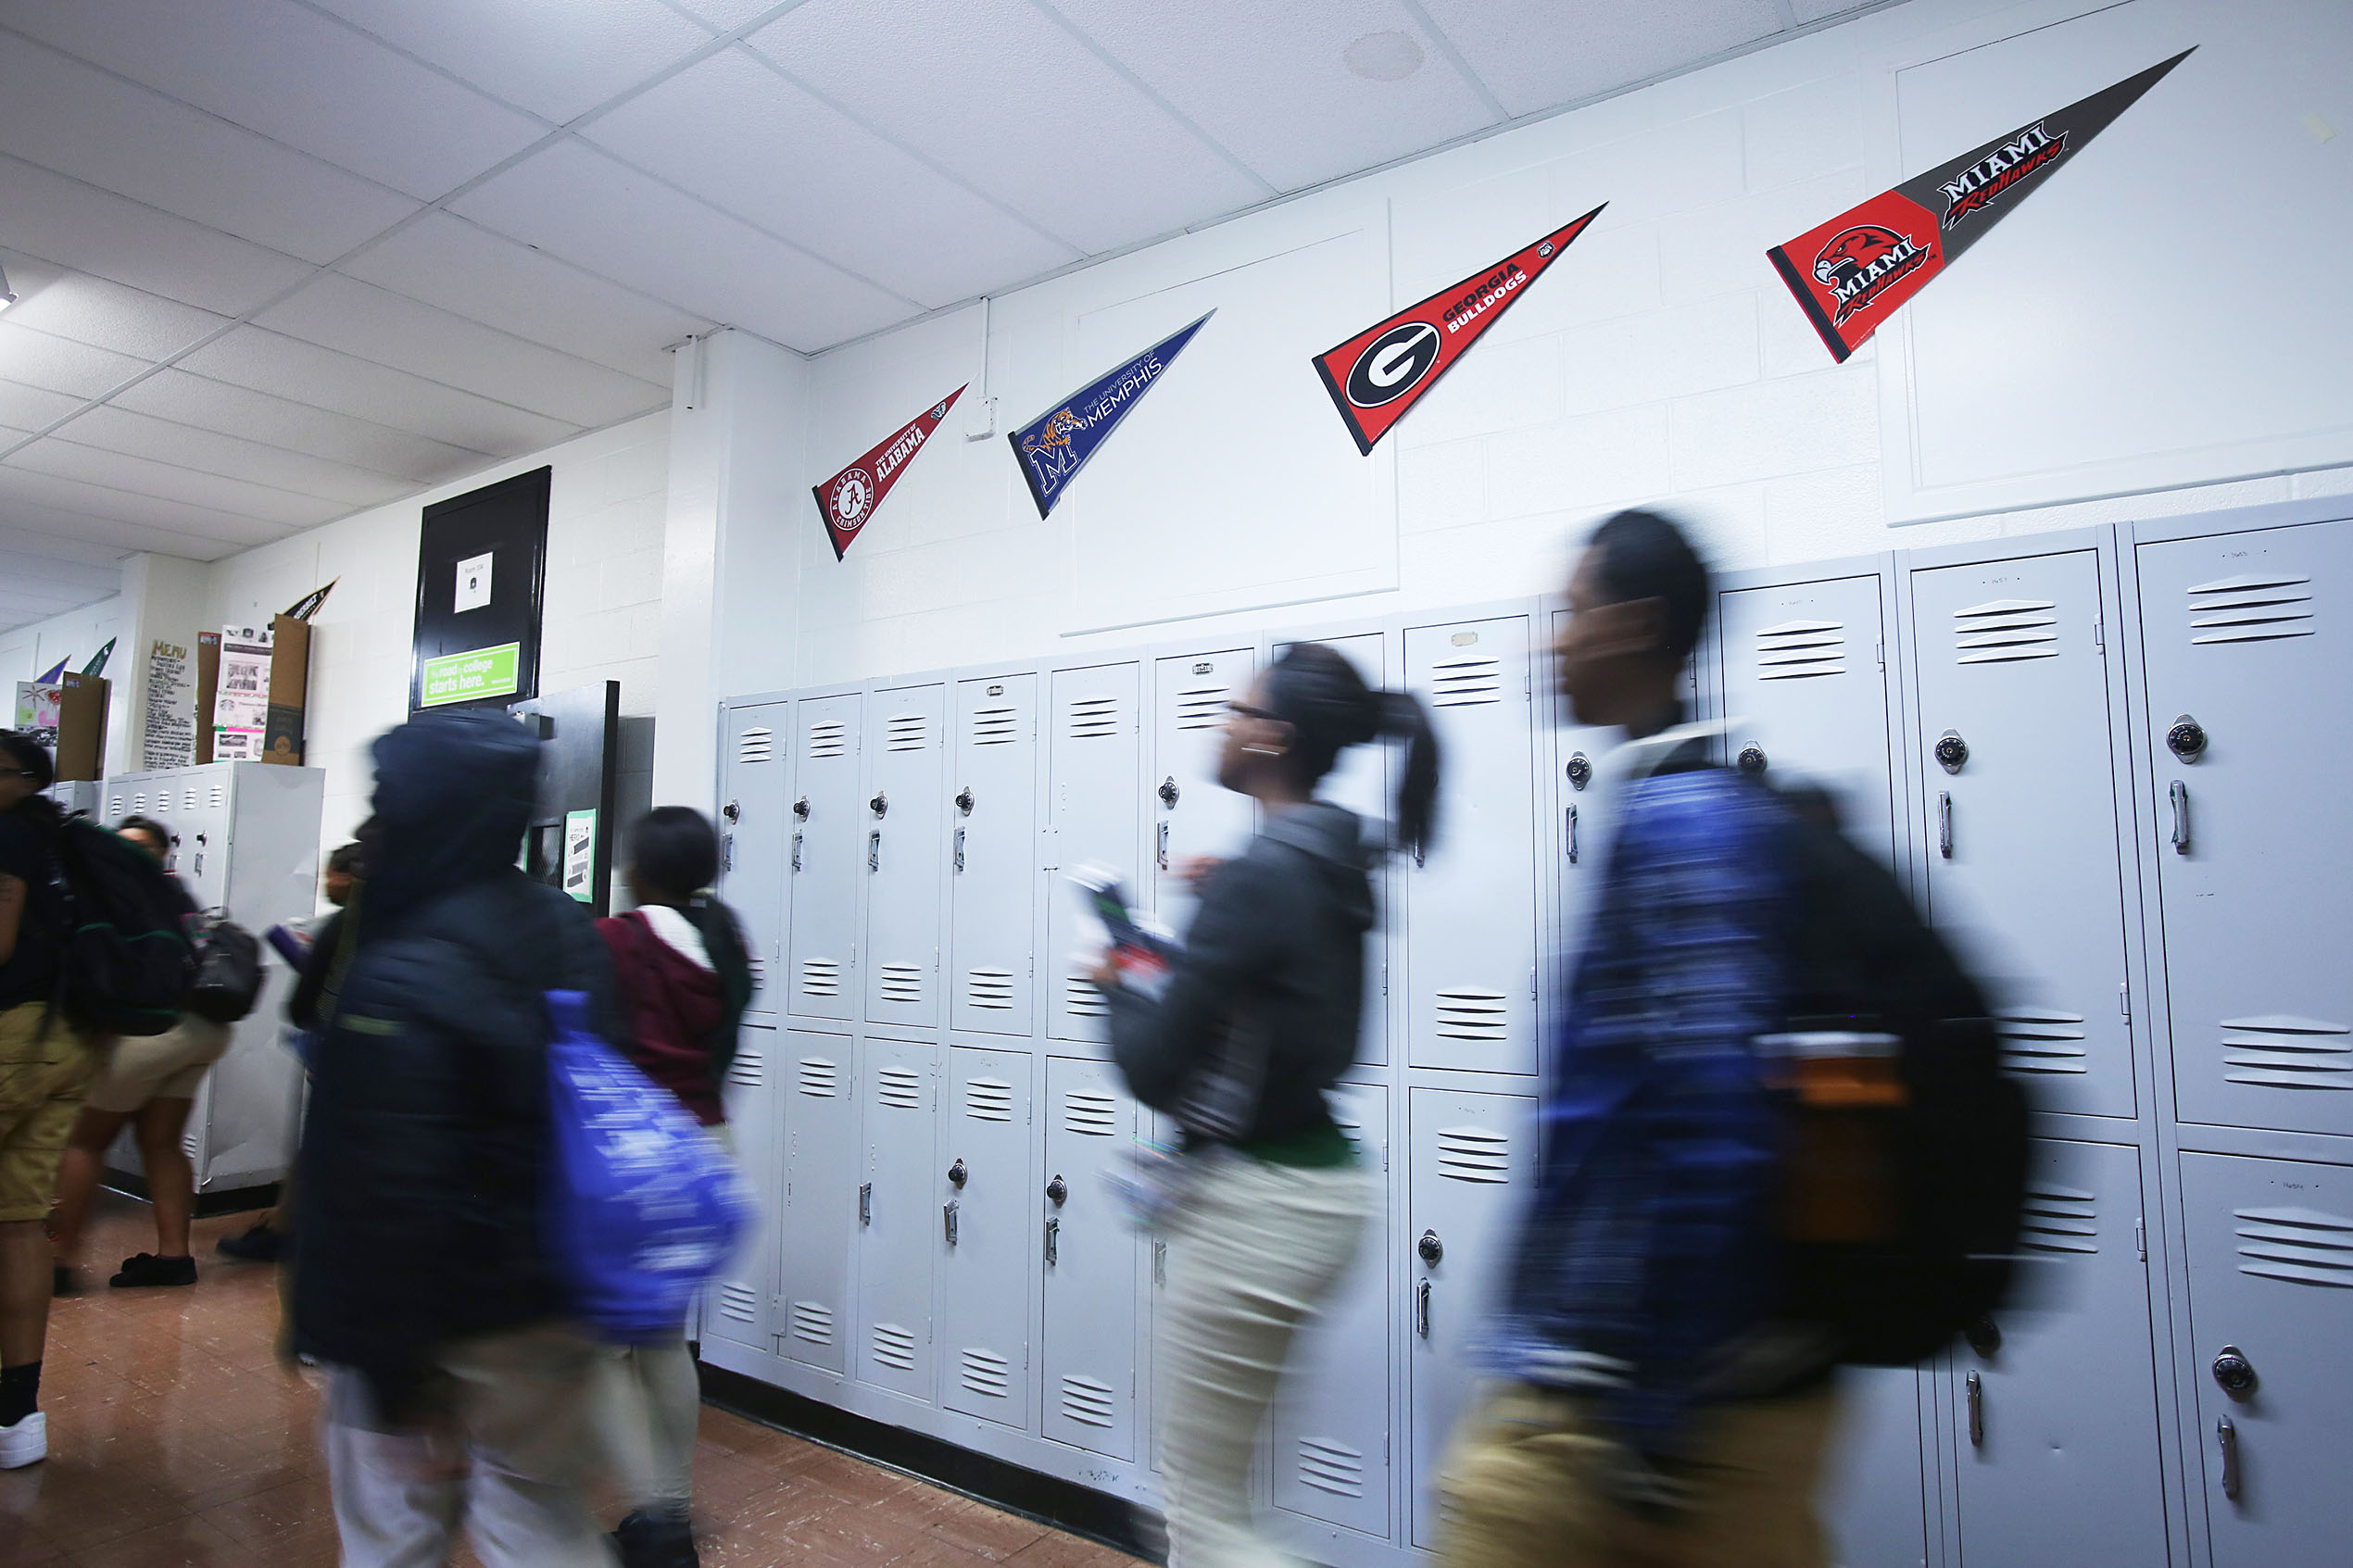 Students walk in a hallway past lockers at a high school in the Achievement School District.